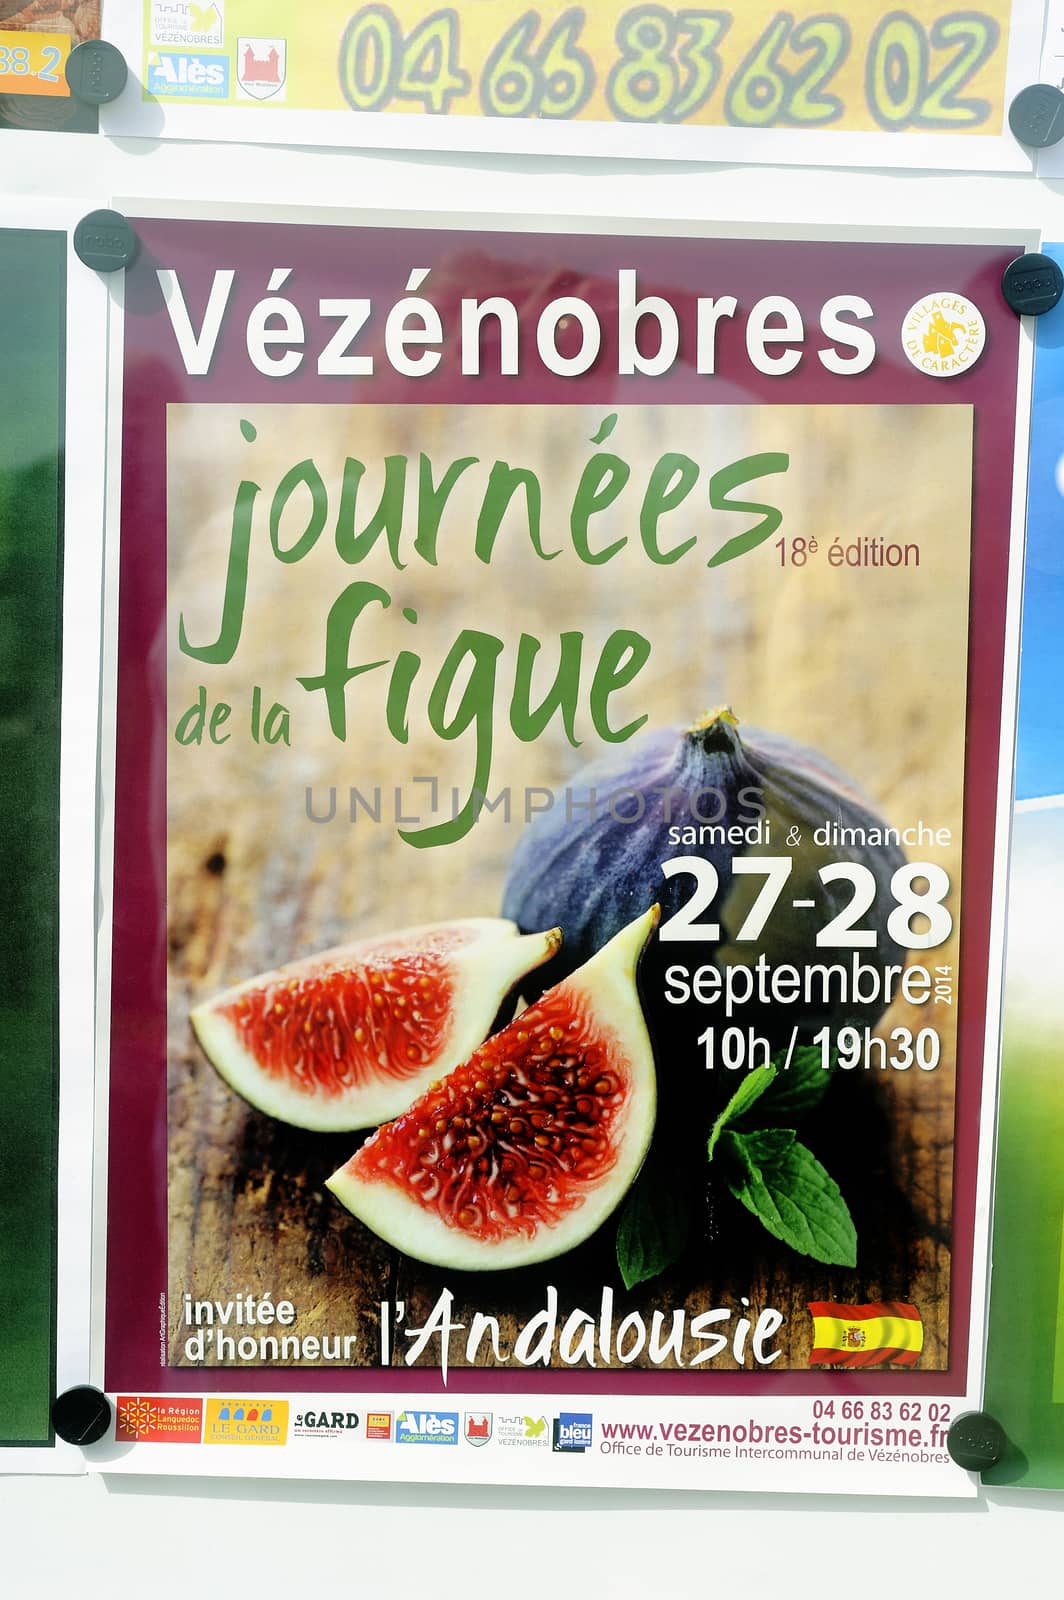 Poster announcing the feast of figs in late September as every year in the village of Vezenobres in the French department of Gard